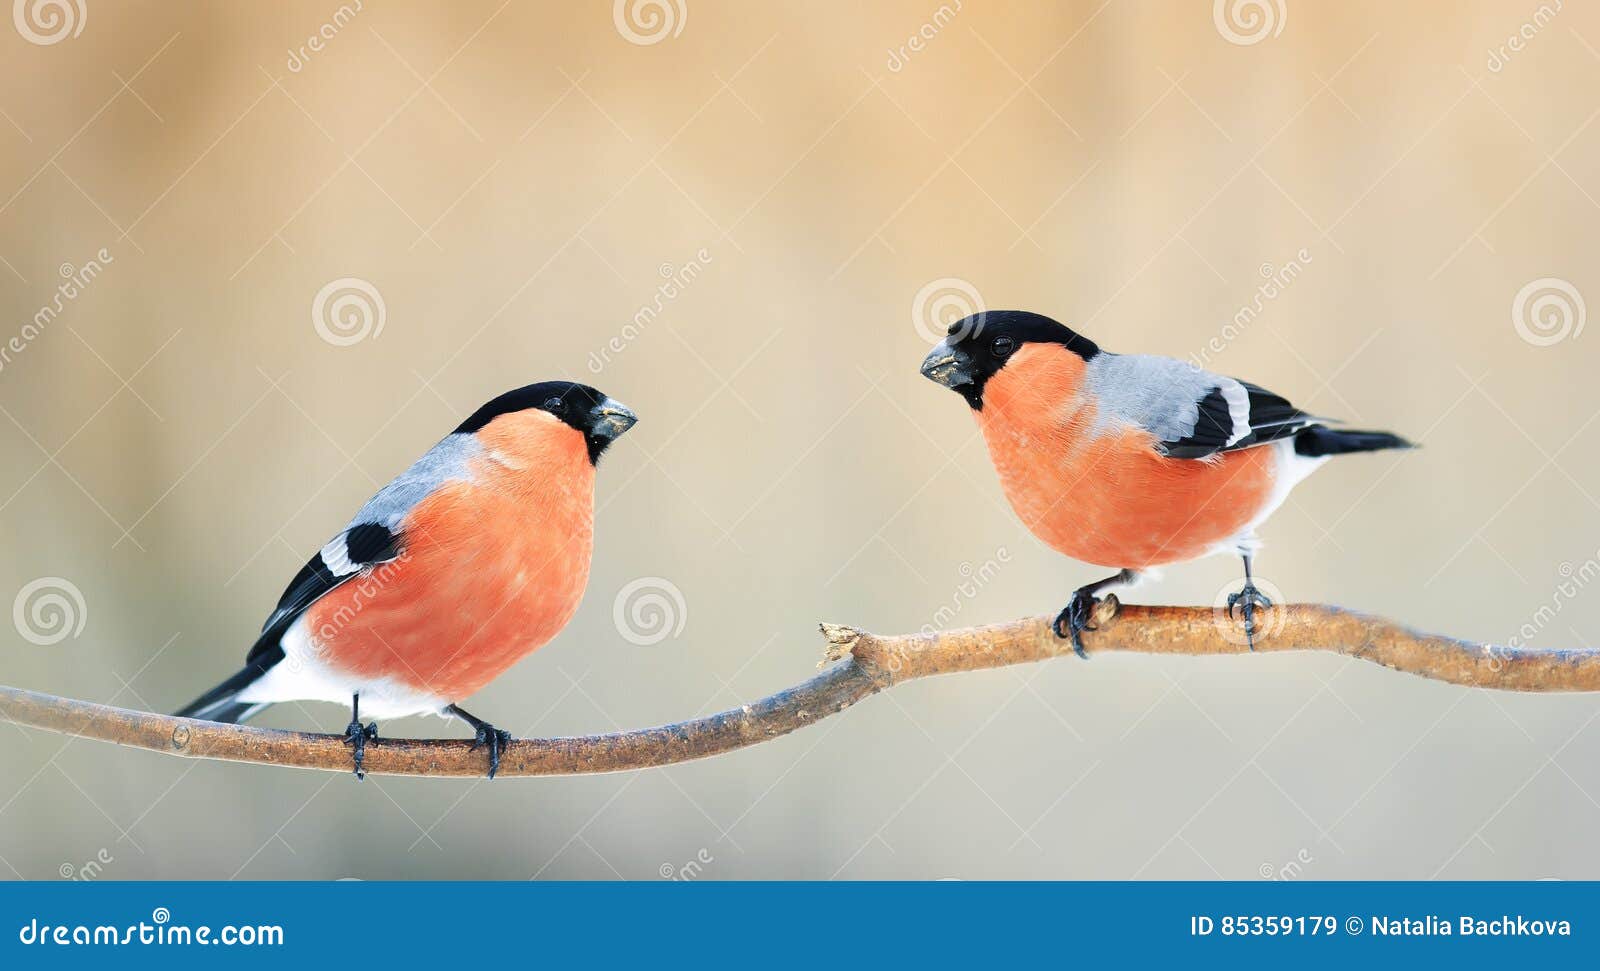 Natural Winter Background with Beautiful Birds Tits Hang on a Sh